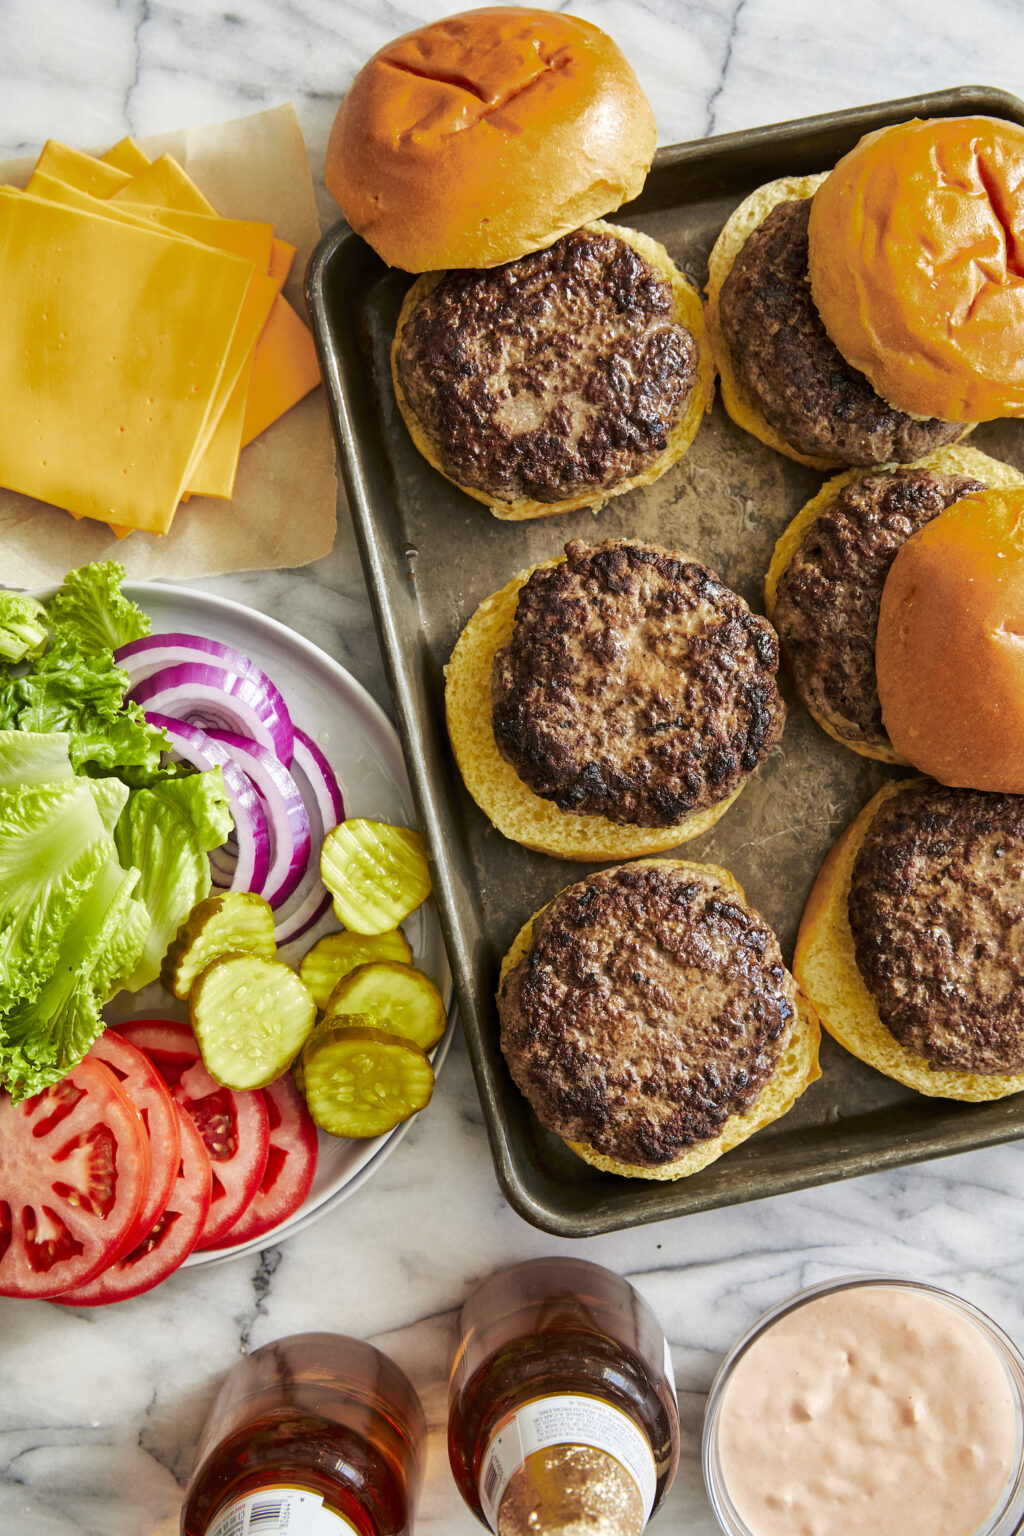 Serve on toasted brioche hamburger buns with chosen toppings (all the bread and butter pickles for me). And don't forget to pick up some high-quality American cheese (or your preferred variety if you're not a fan of American cheddar).